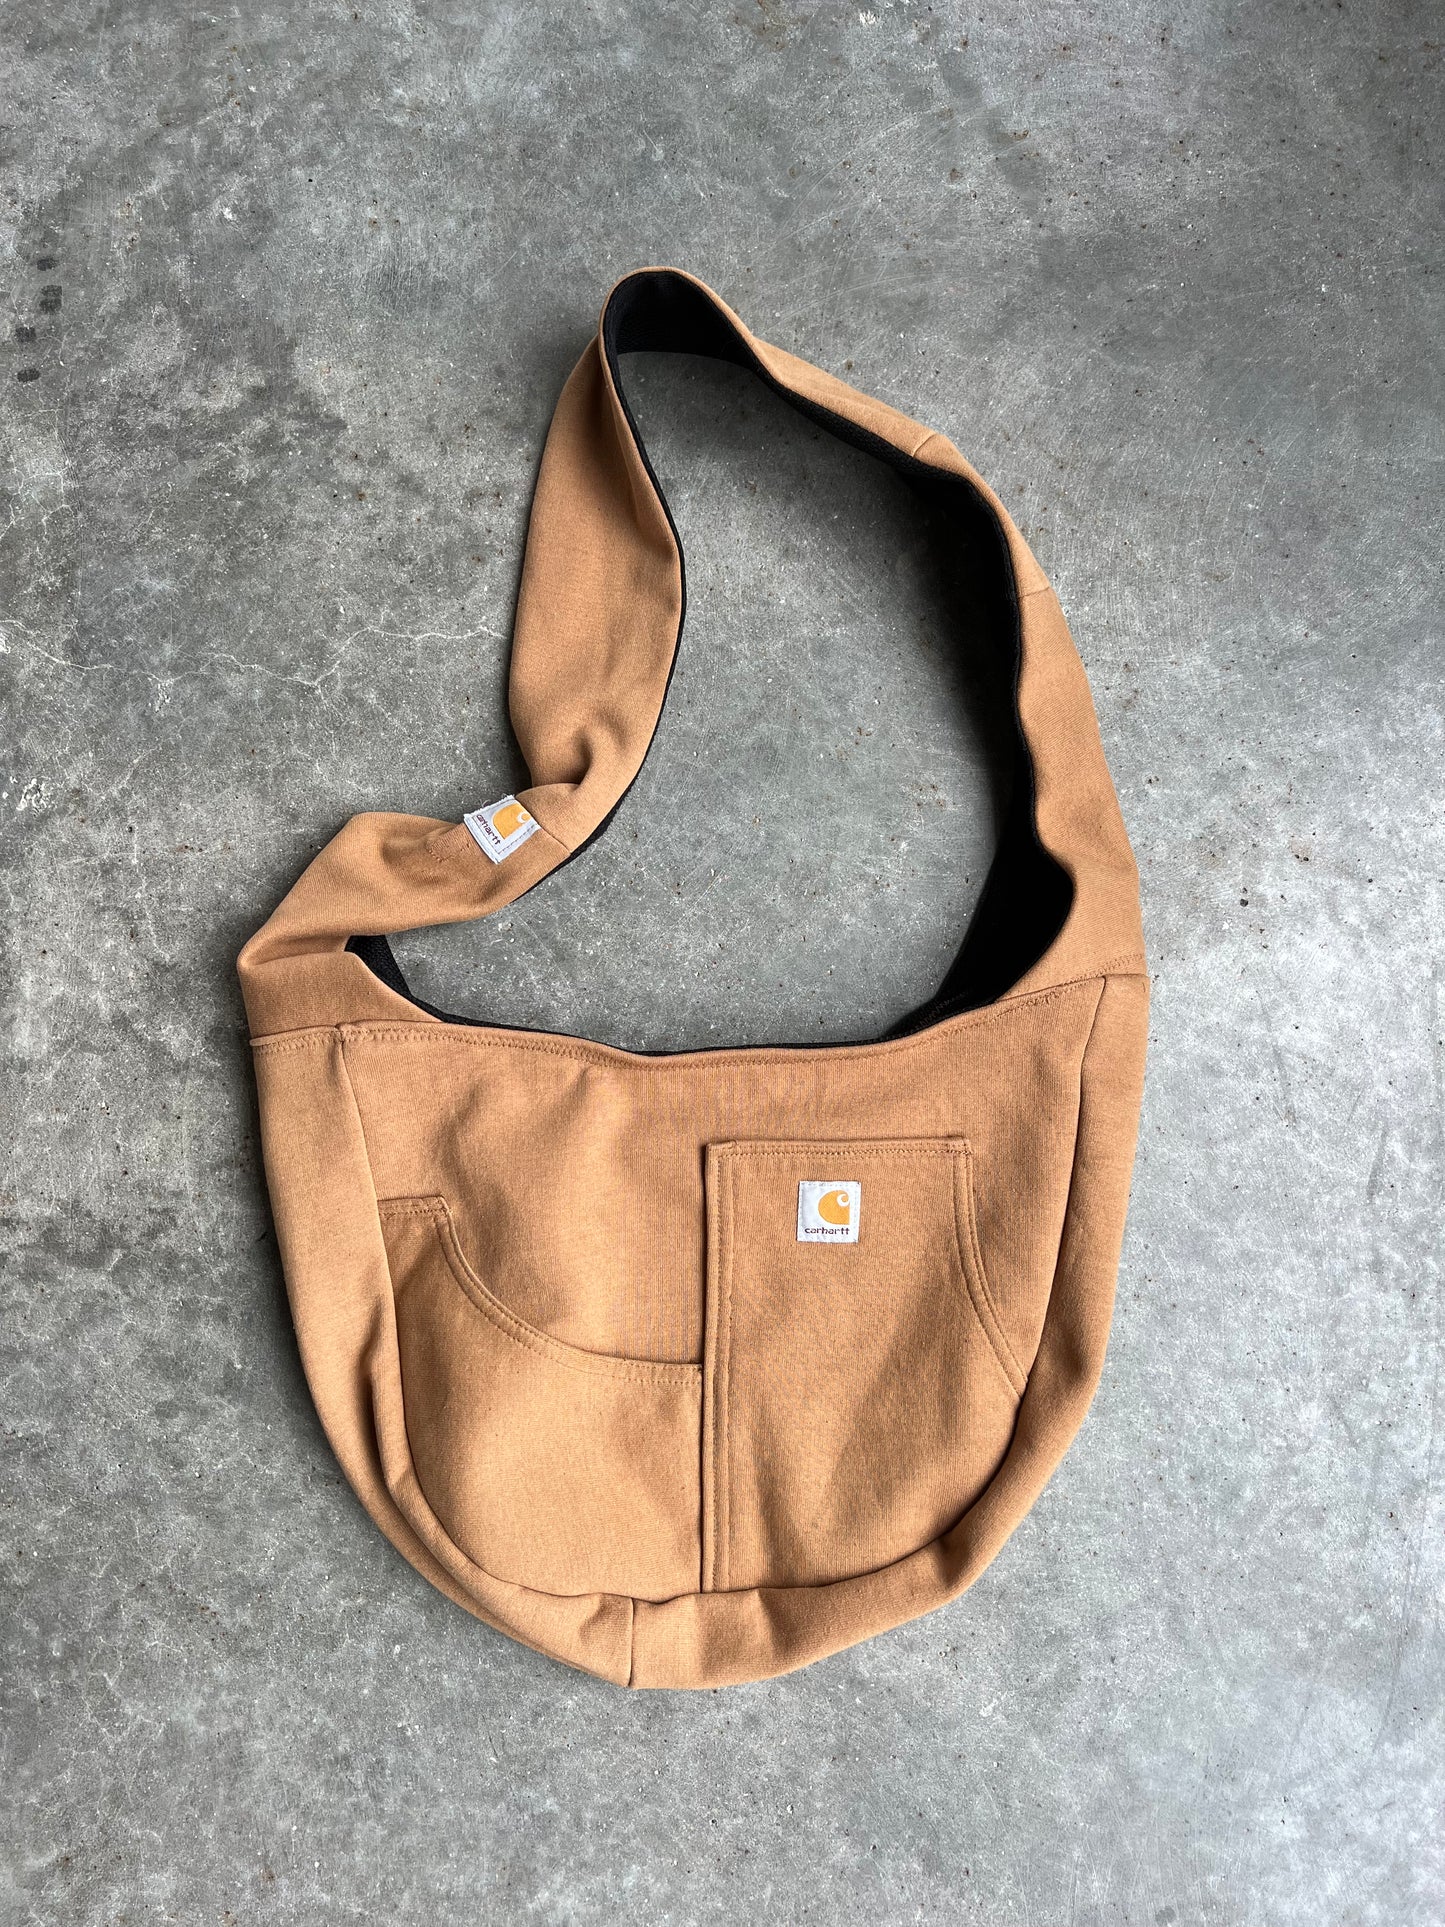 Reworked Carhartt Tote - OS